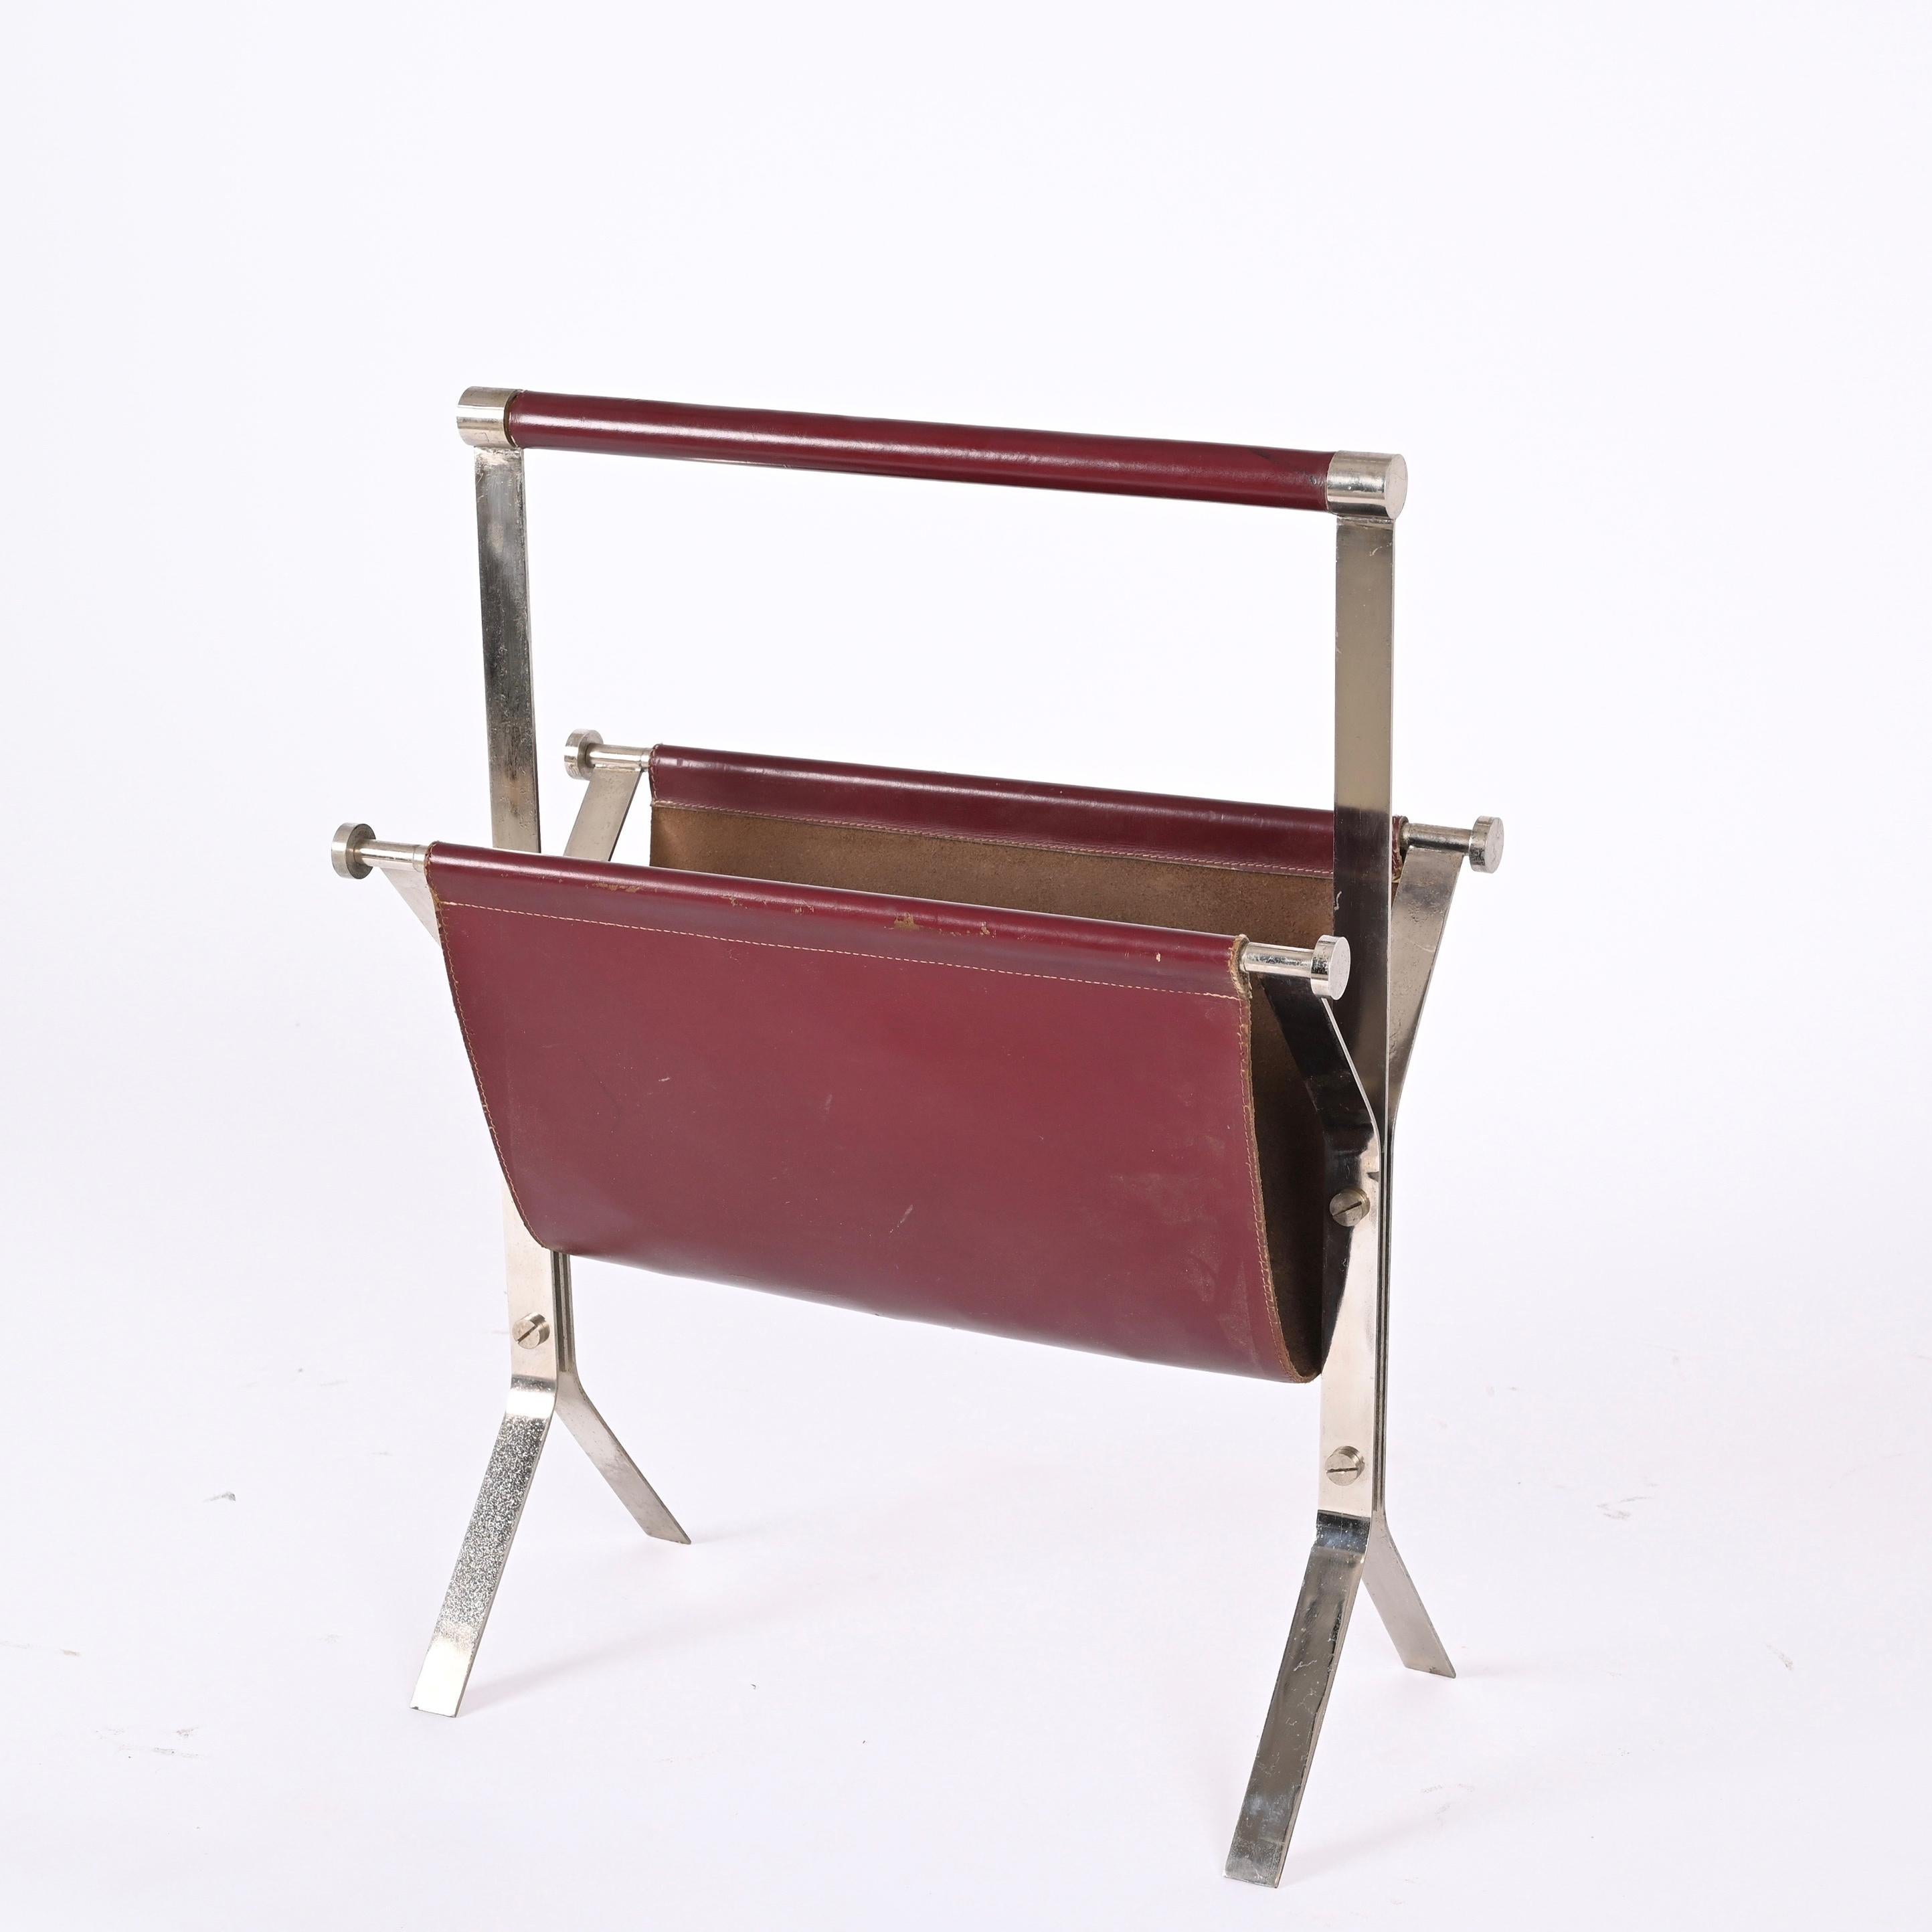 Alessandro Albrizzi Midcentury Chromed Steel and Red Leather Magazine Rack 1970s For Sale 5